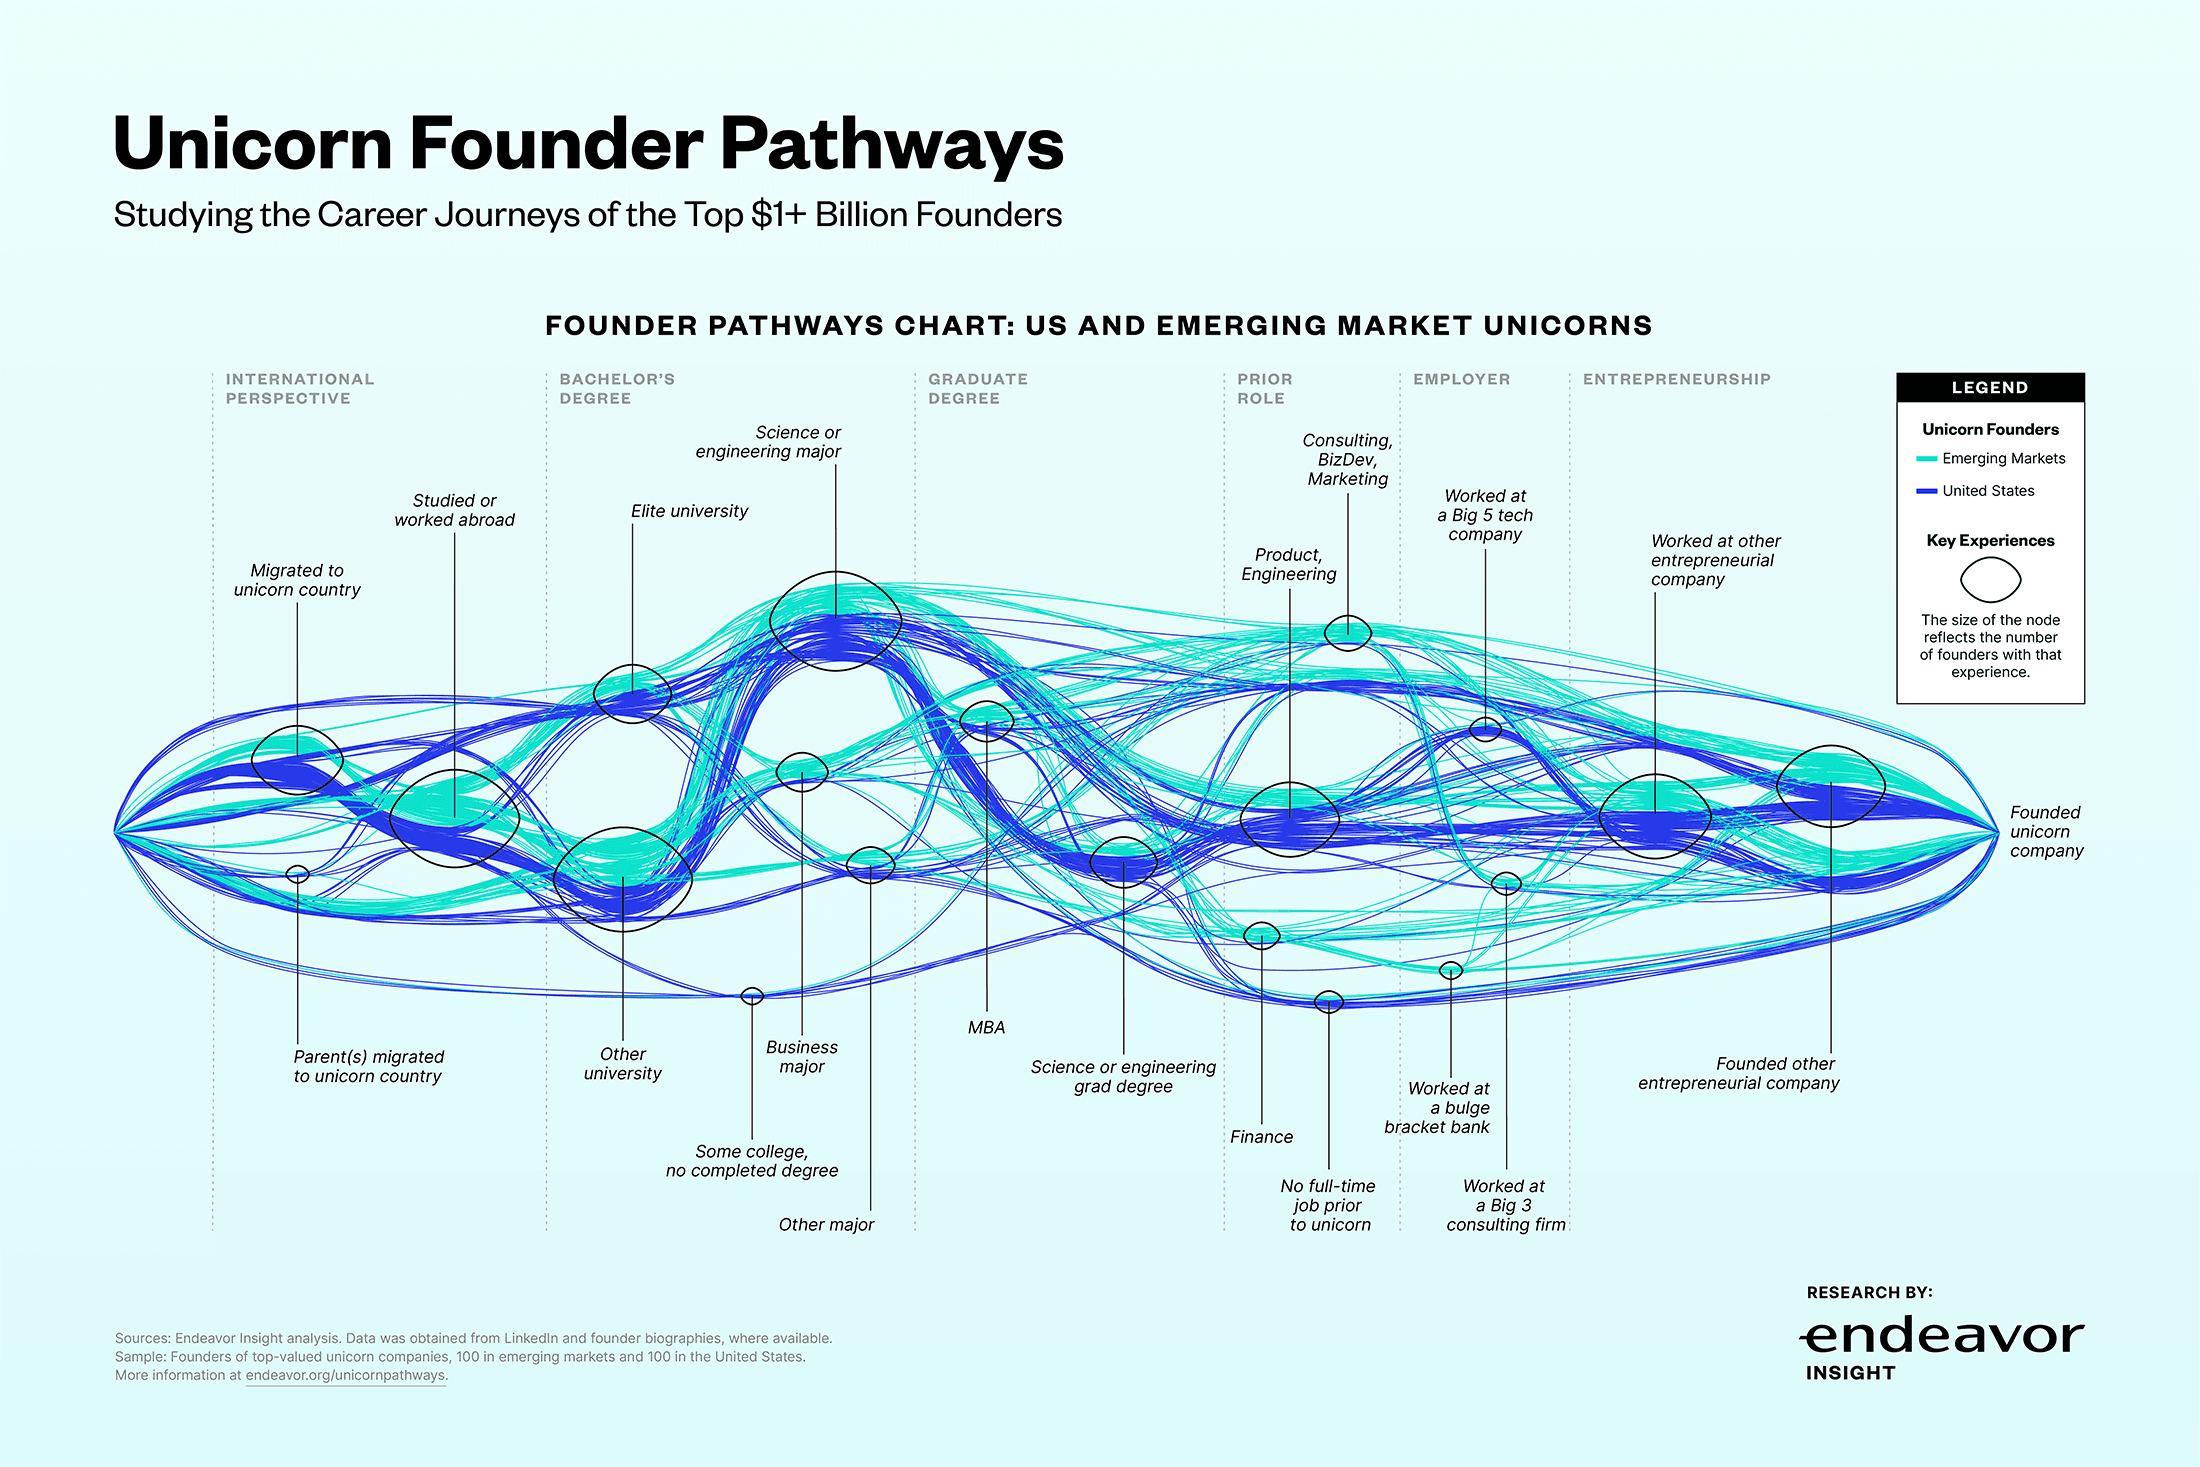 Unicorn founder pathways – a case study by Endeavor